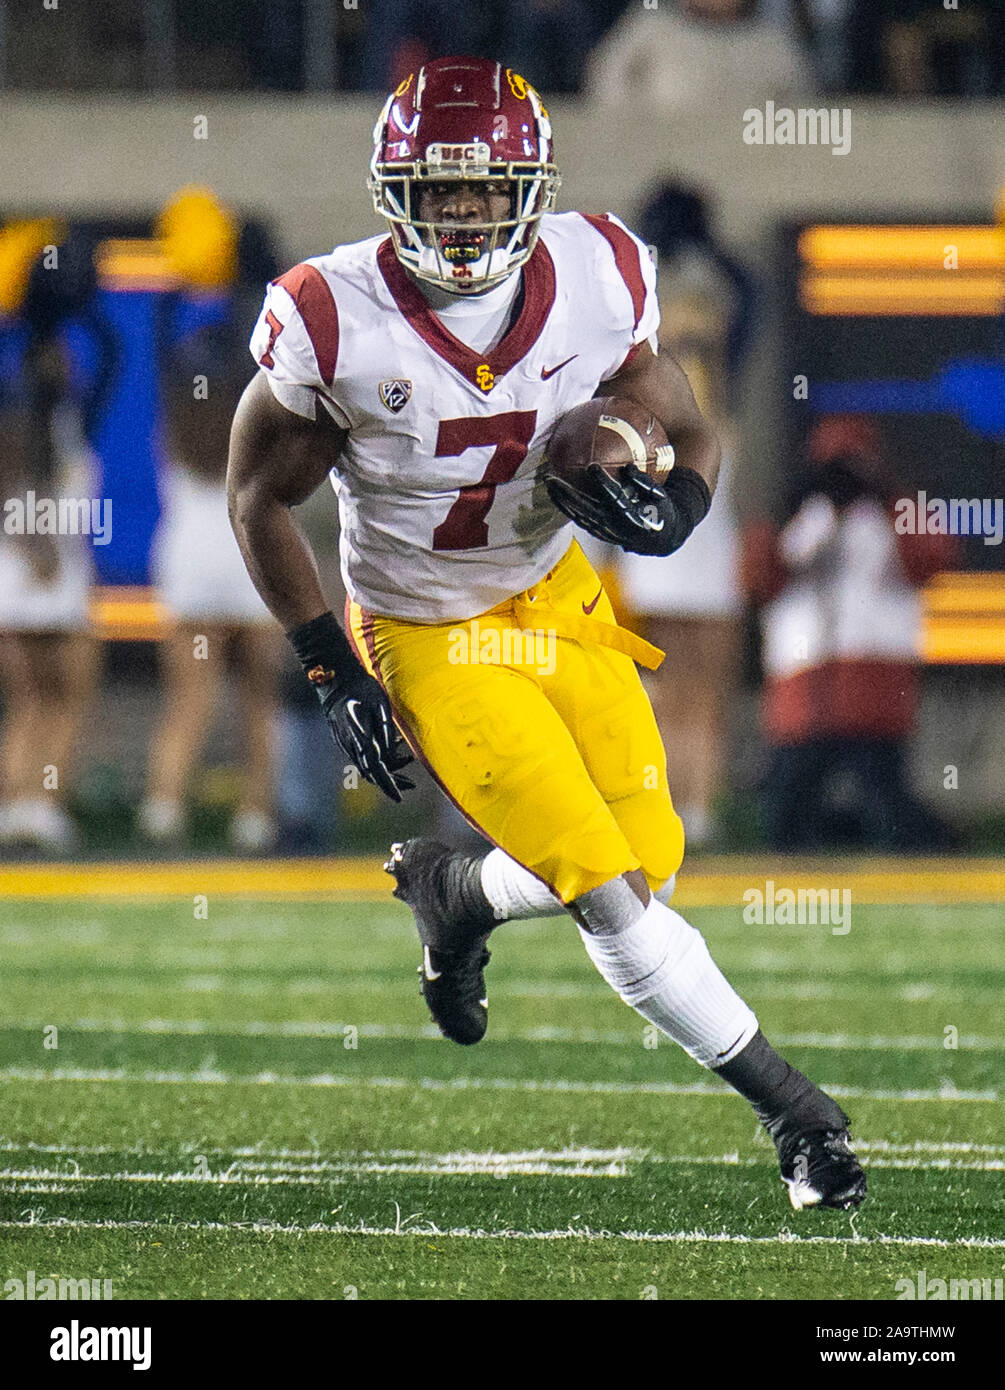 California Memorial Stadium. 16th Nov, 2019. CA U.S.A. USC running back Stephen Carr(7) breaks to the outside for a long run during the NCAA Football game between USC Trojans and the California Golden Bears 41-17 win at California Memorial Stadium. Thurman James/CSM/Alamy Live News Stock Photo